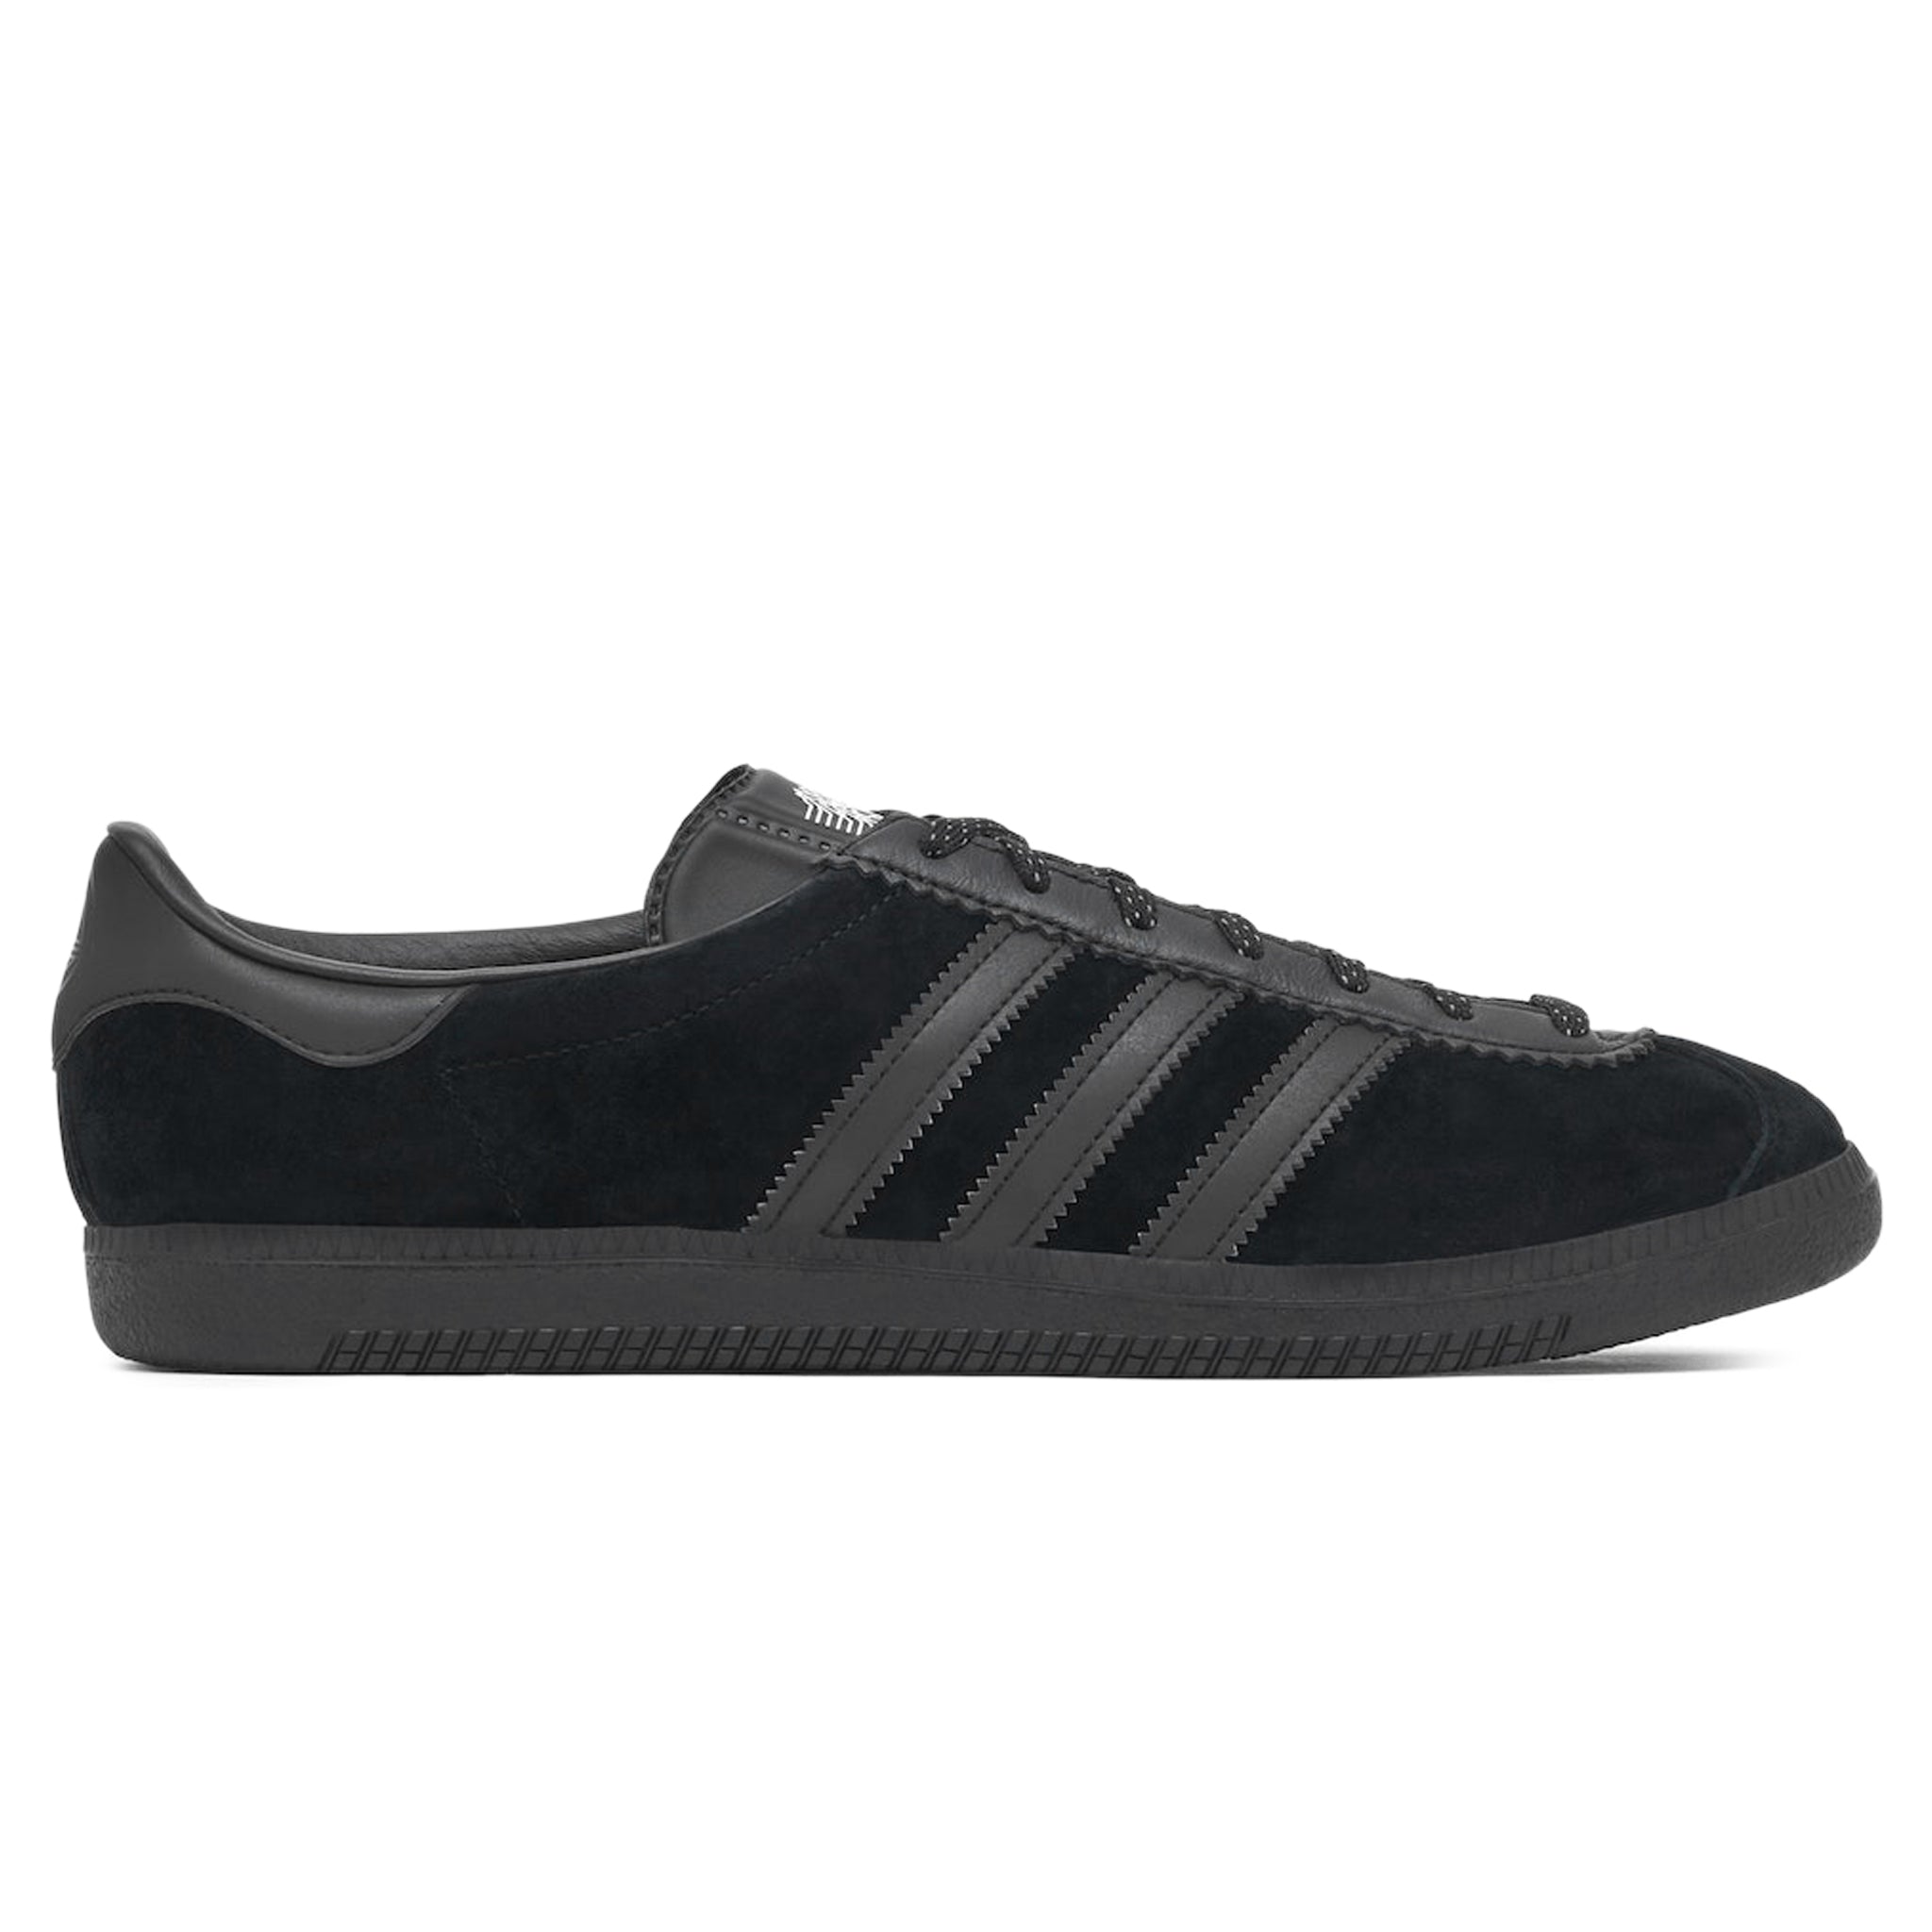 Side view of Peter Saville x Adidas Pulsebeat Spezial Black Carbon GV9031